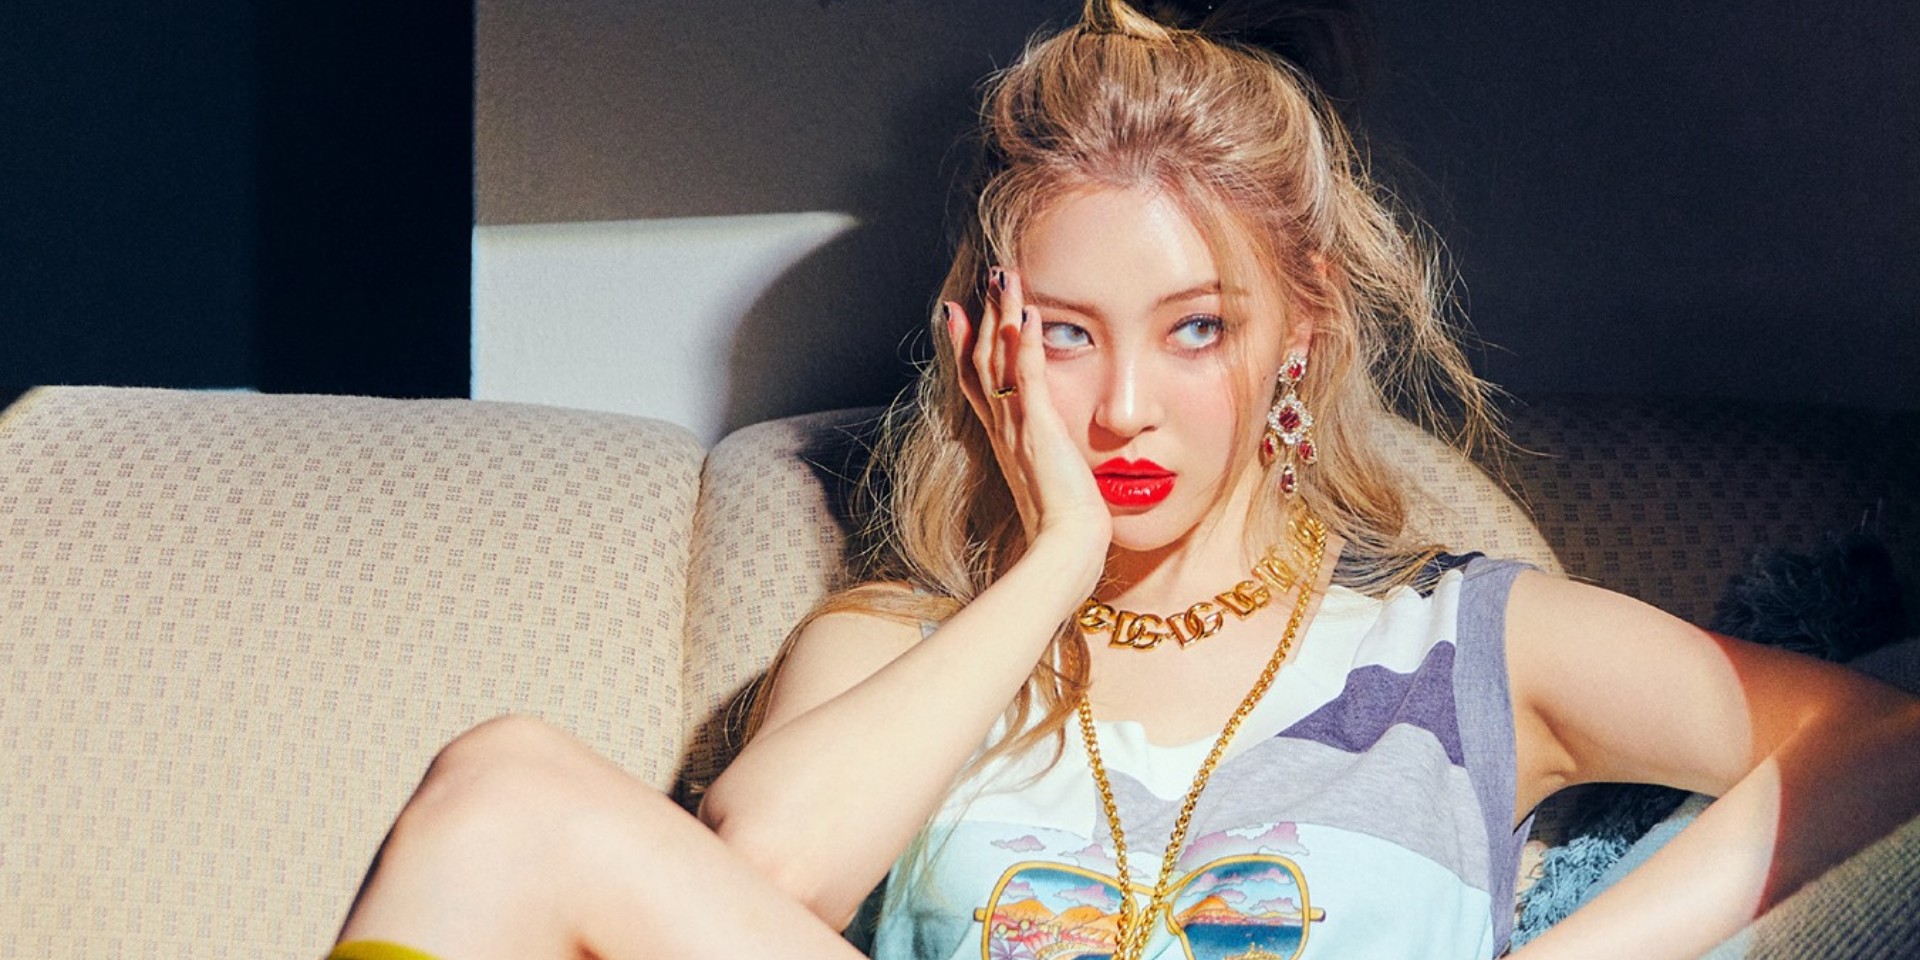 SUNMI releases mini-album '1/6' with music video for 'You Can't Sit With Us' - watch